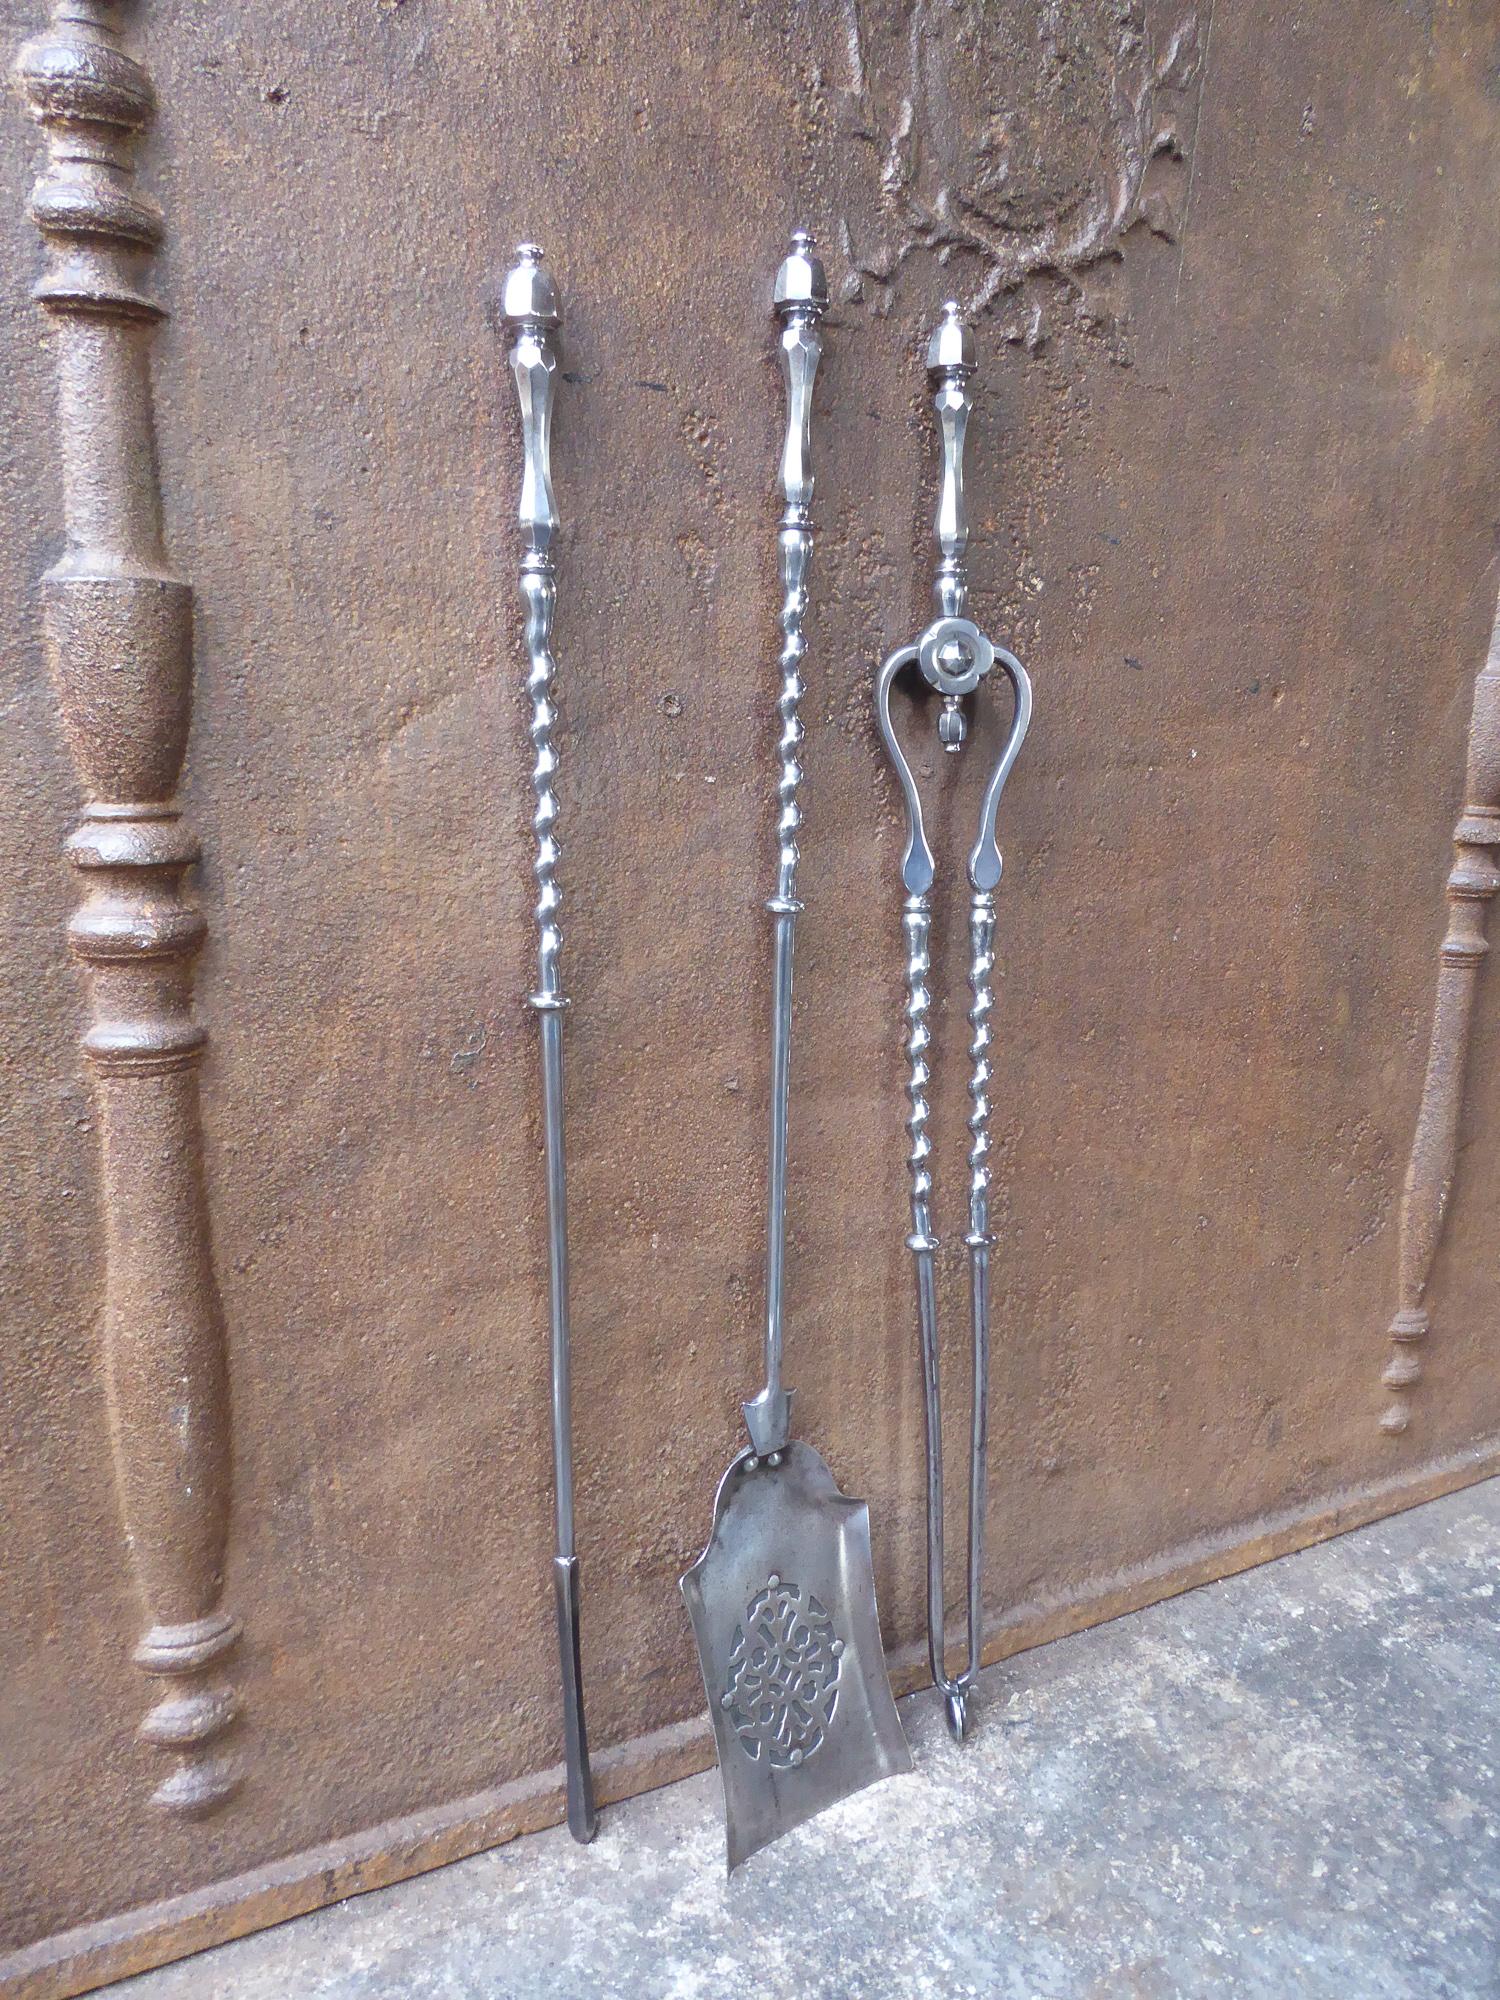 18th-19th century English Georgian fireplace tool set. The fine fire irons are made of polished steel. They are a good condition and fully functional.